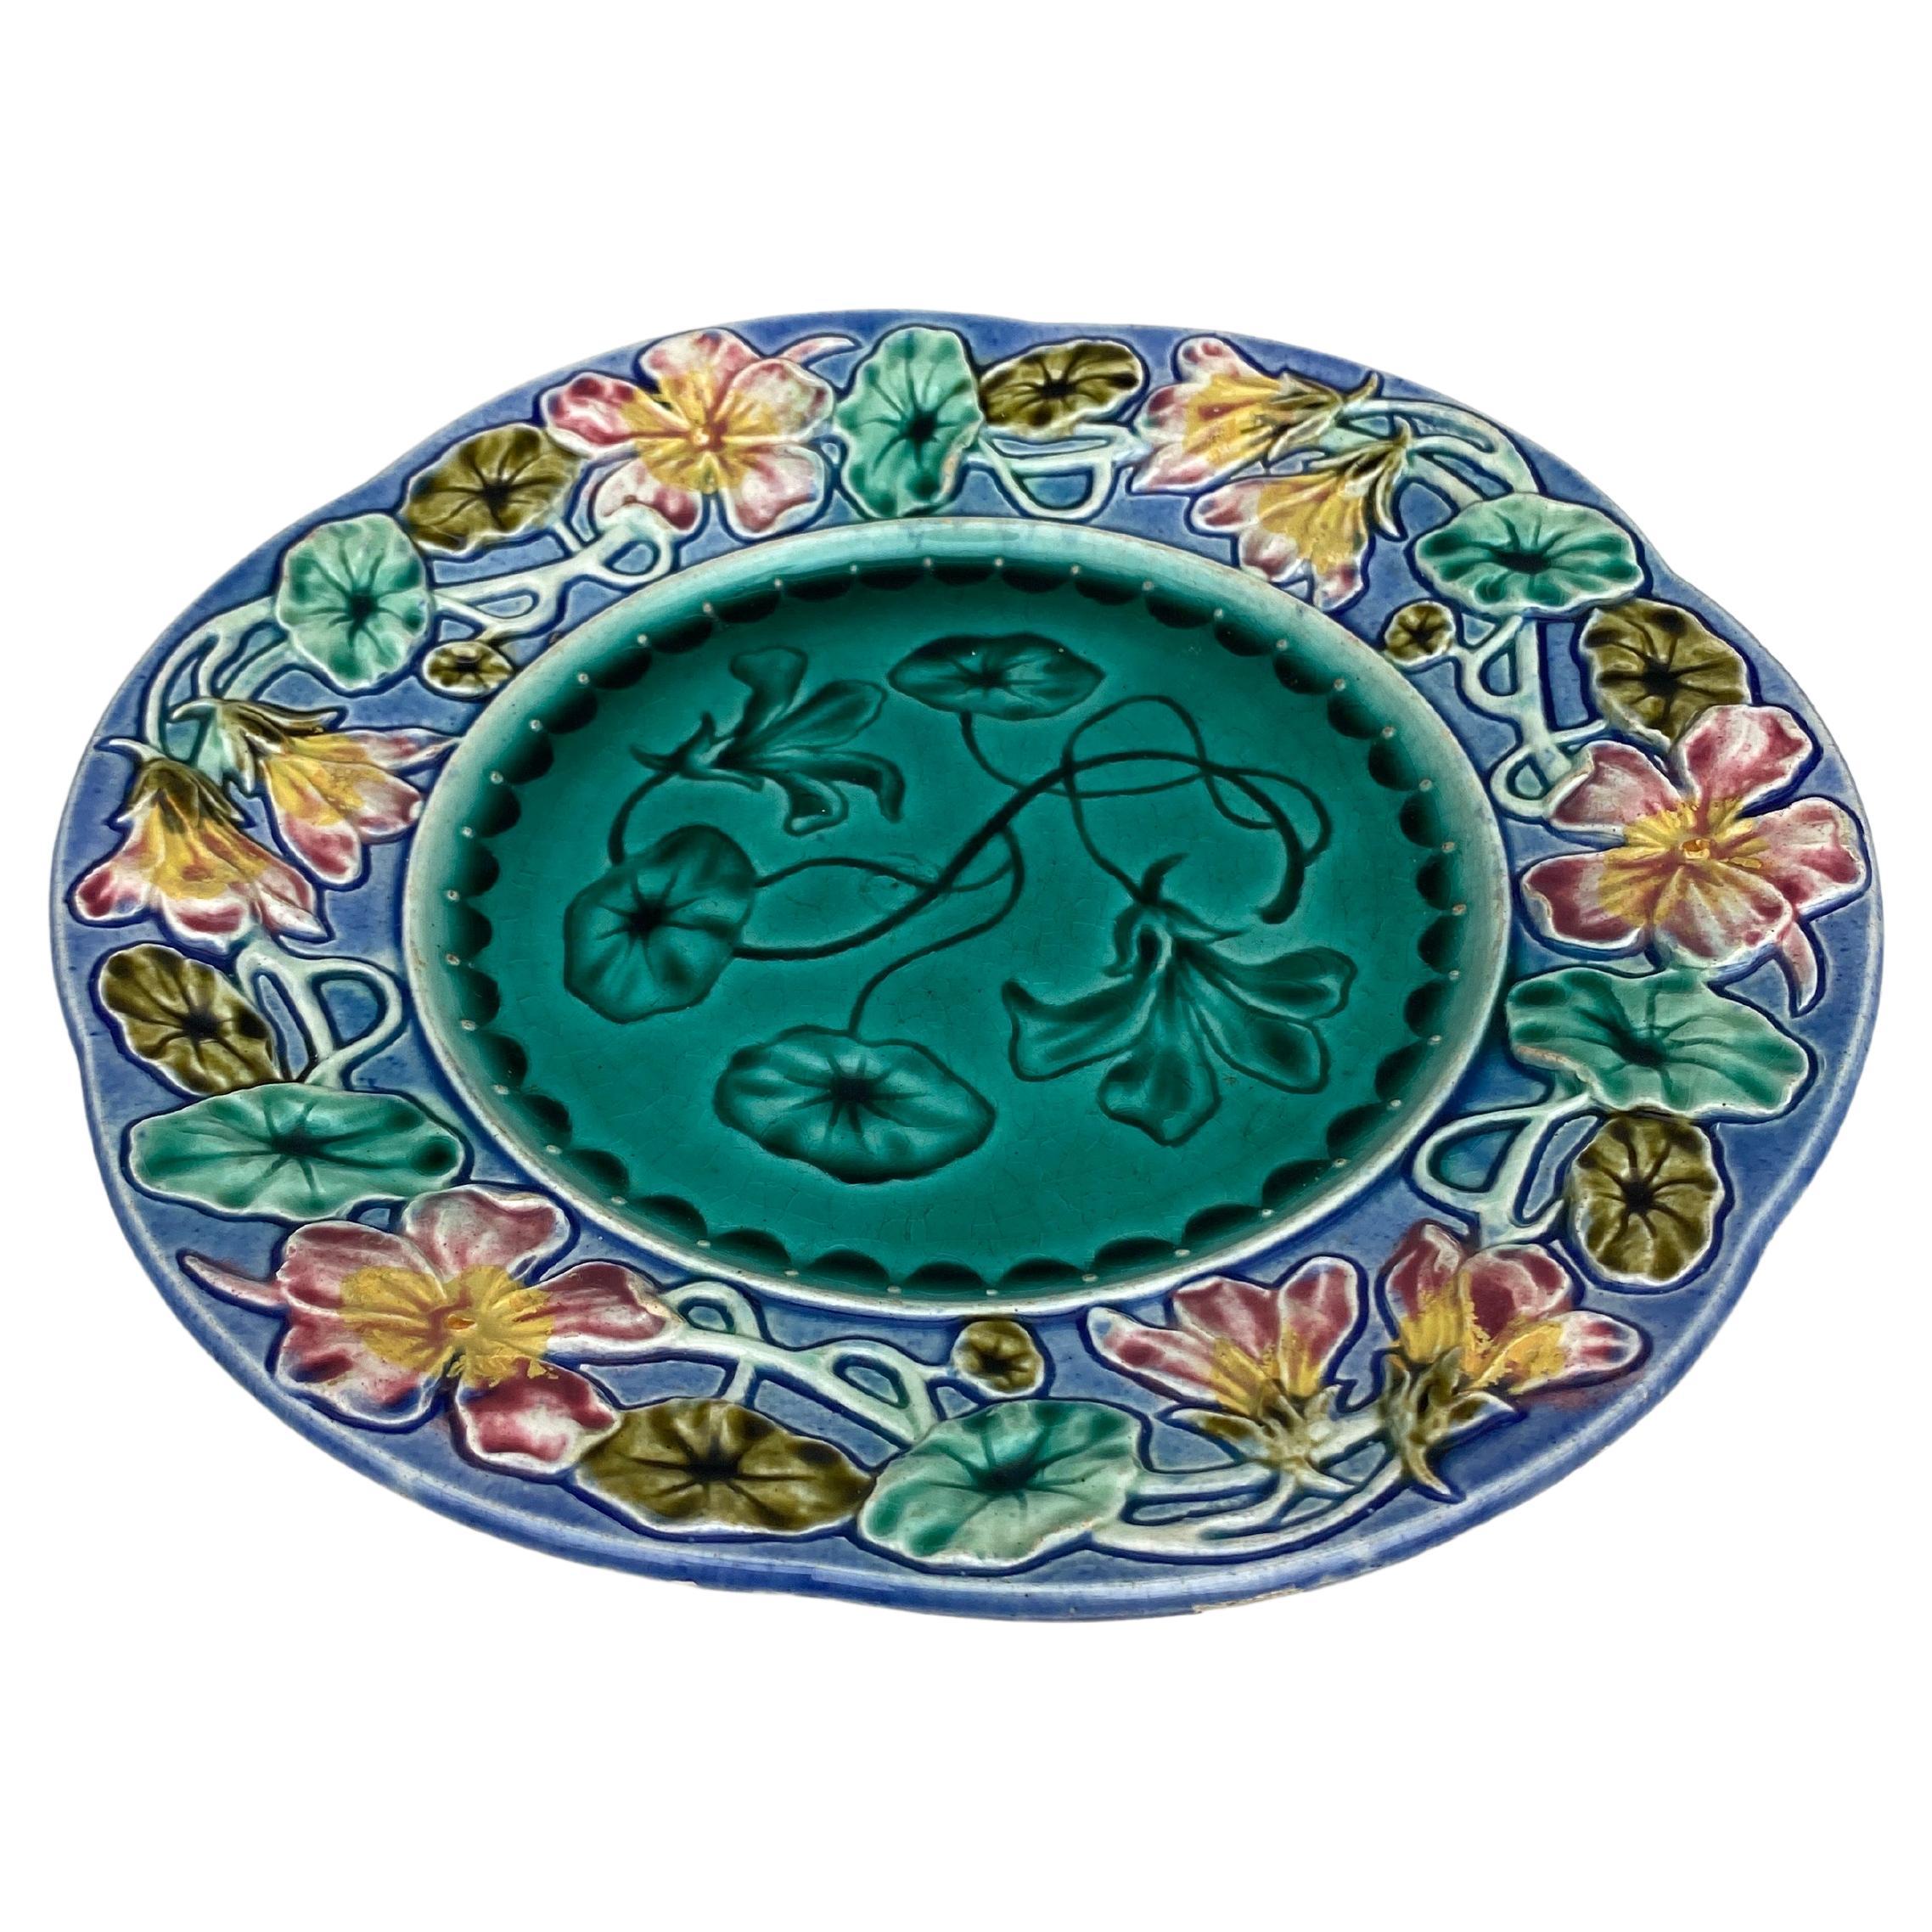 Rustic 19th Century French Majolica Flowers Plate For Sale